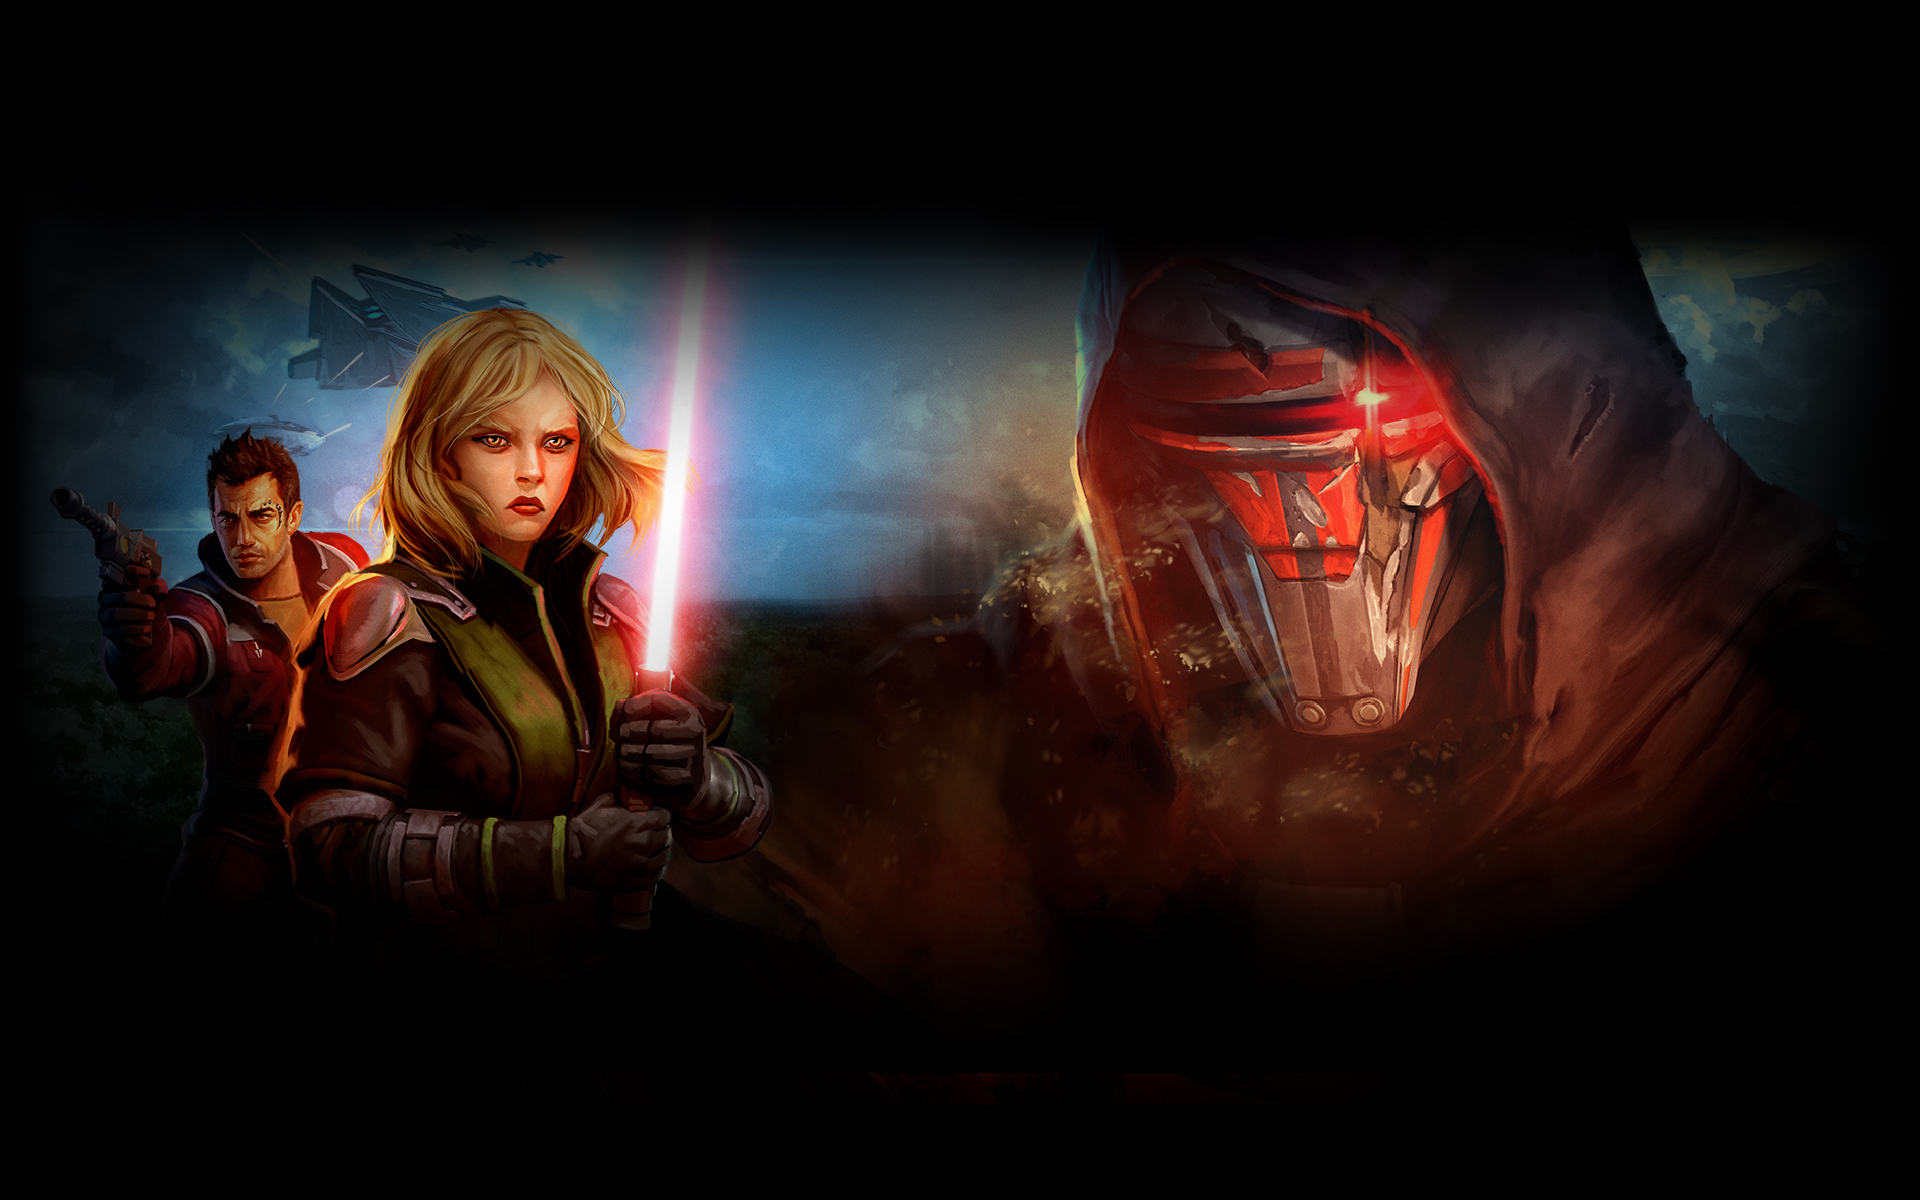 Shadow of Revan Wallpaper 2 w Text   1920 by 1200 1920 by 1080